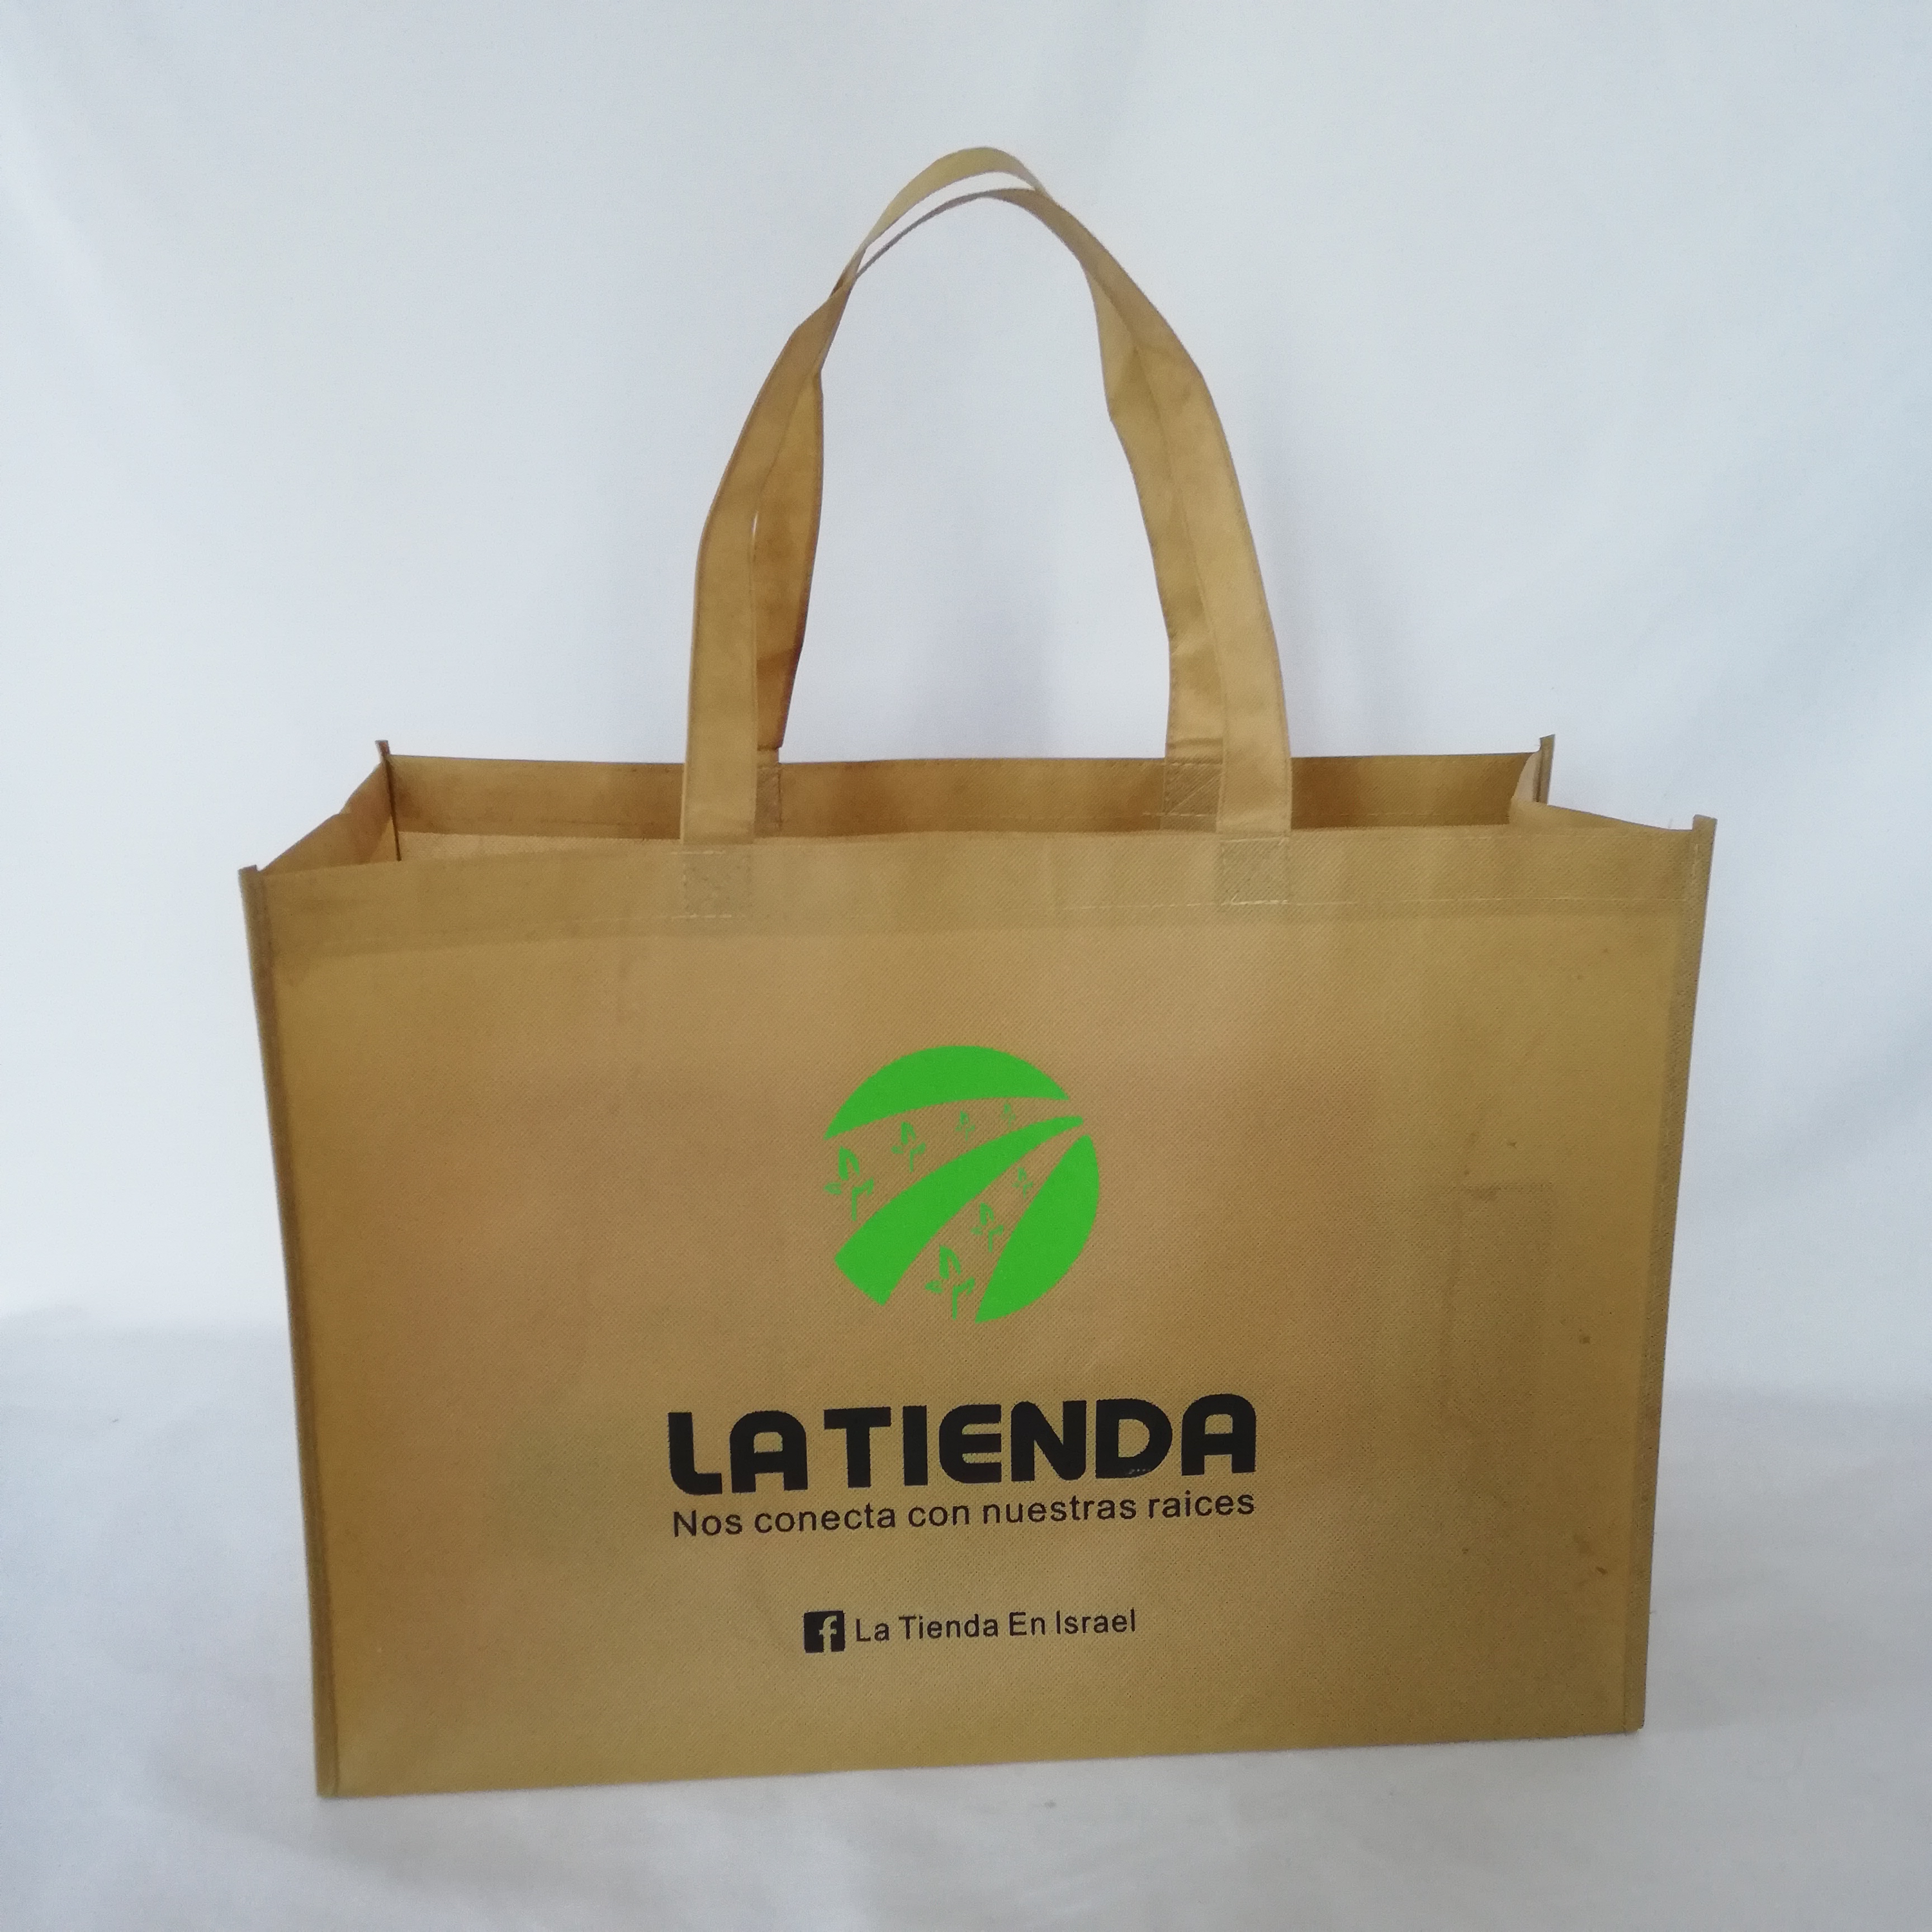 Wholesale 500pcs/lot Custom LOGO Personalized Promotional Reusable Tote Shopping Tote Bags with Logo Market Shopper